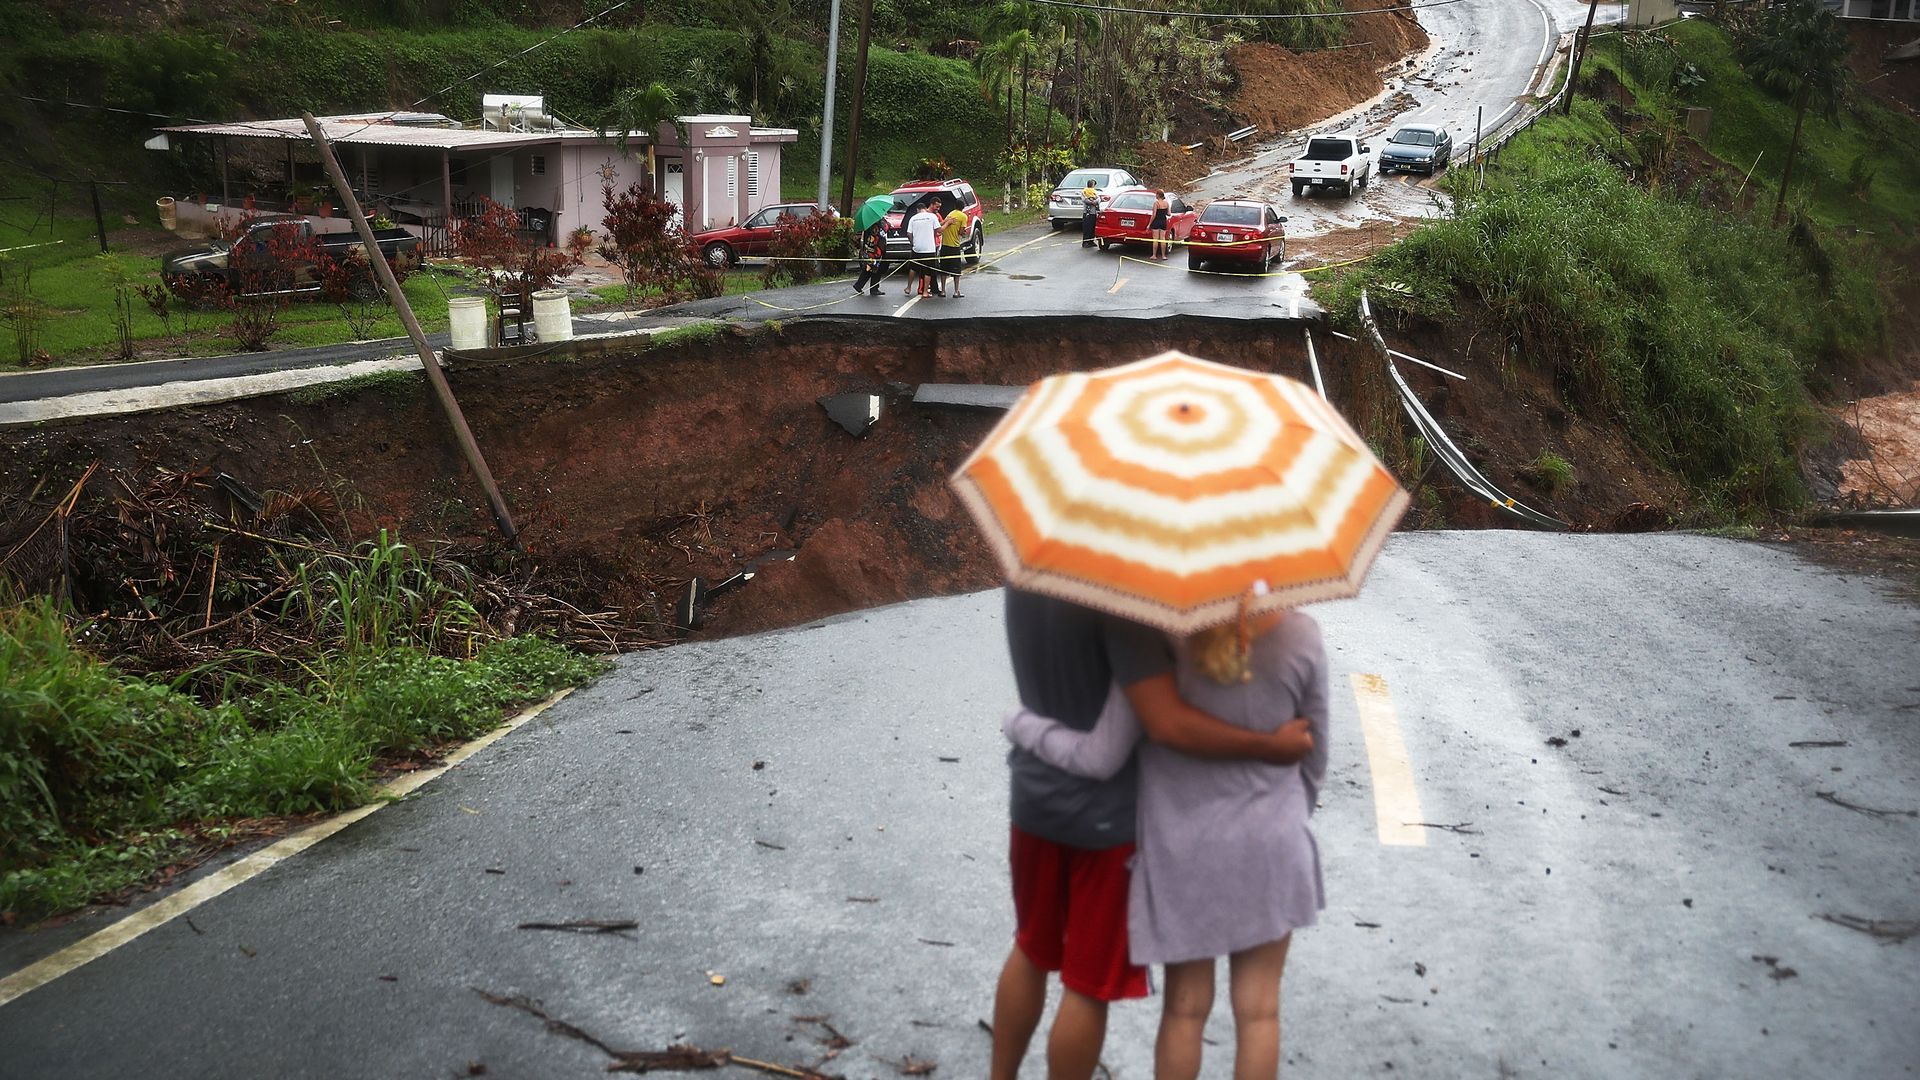 People look on at a section of a road that collapsed in Barranquitas, Puerto Rico after Hurricane Maria swept through the island in 2017.